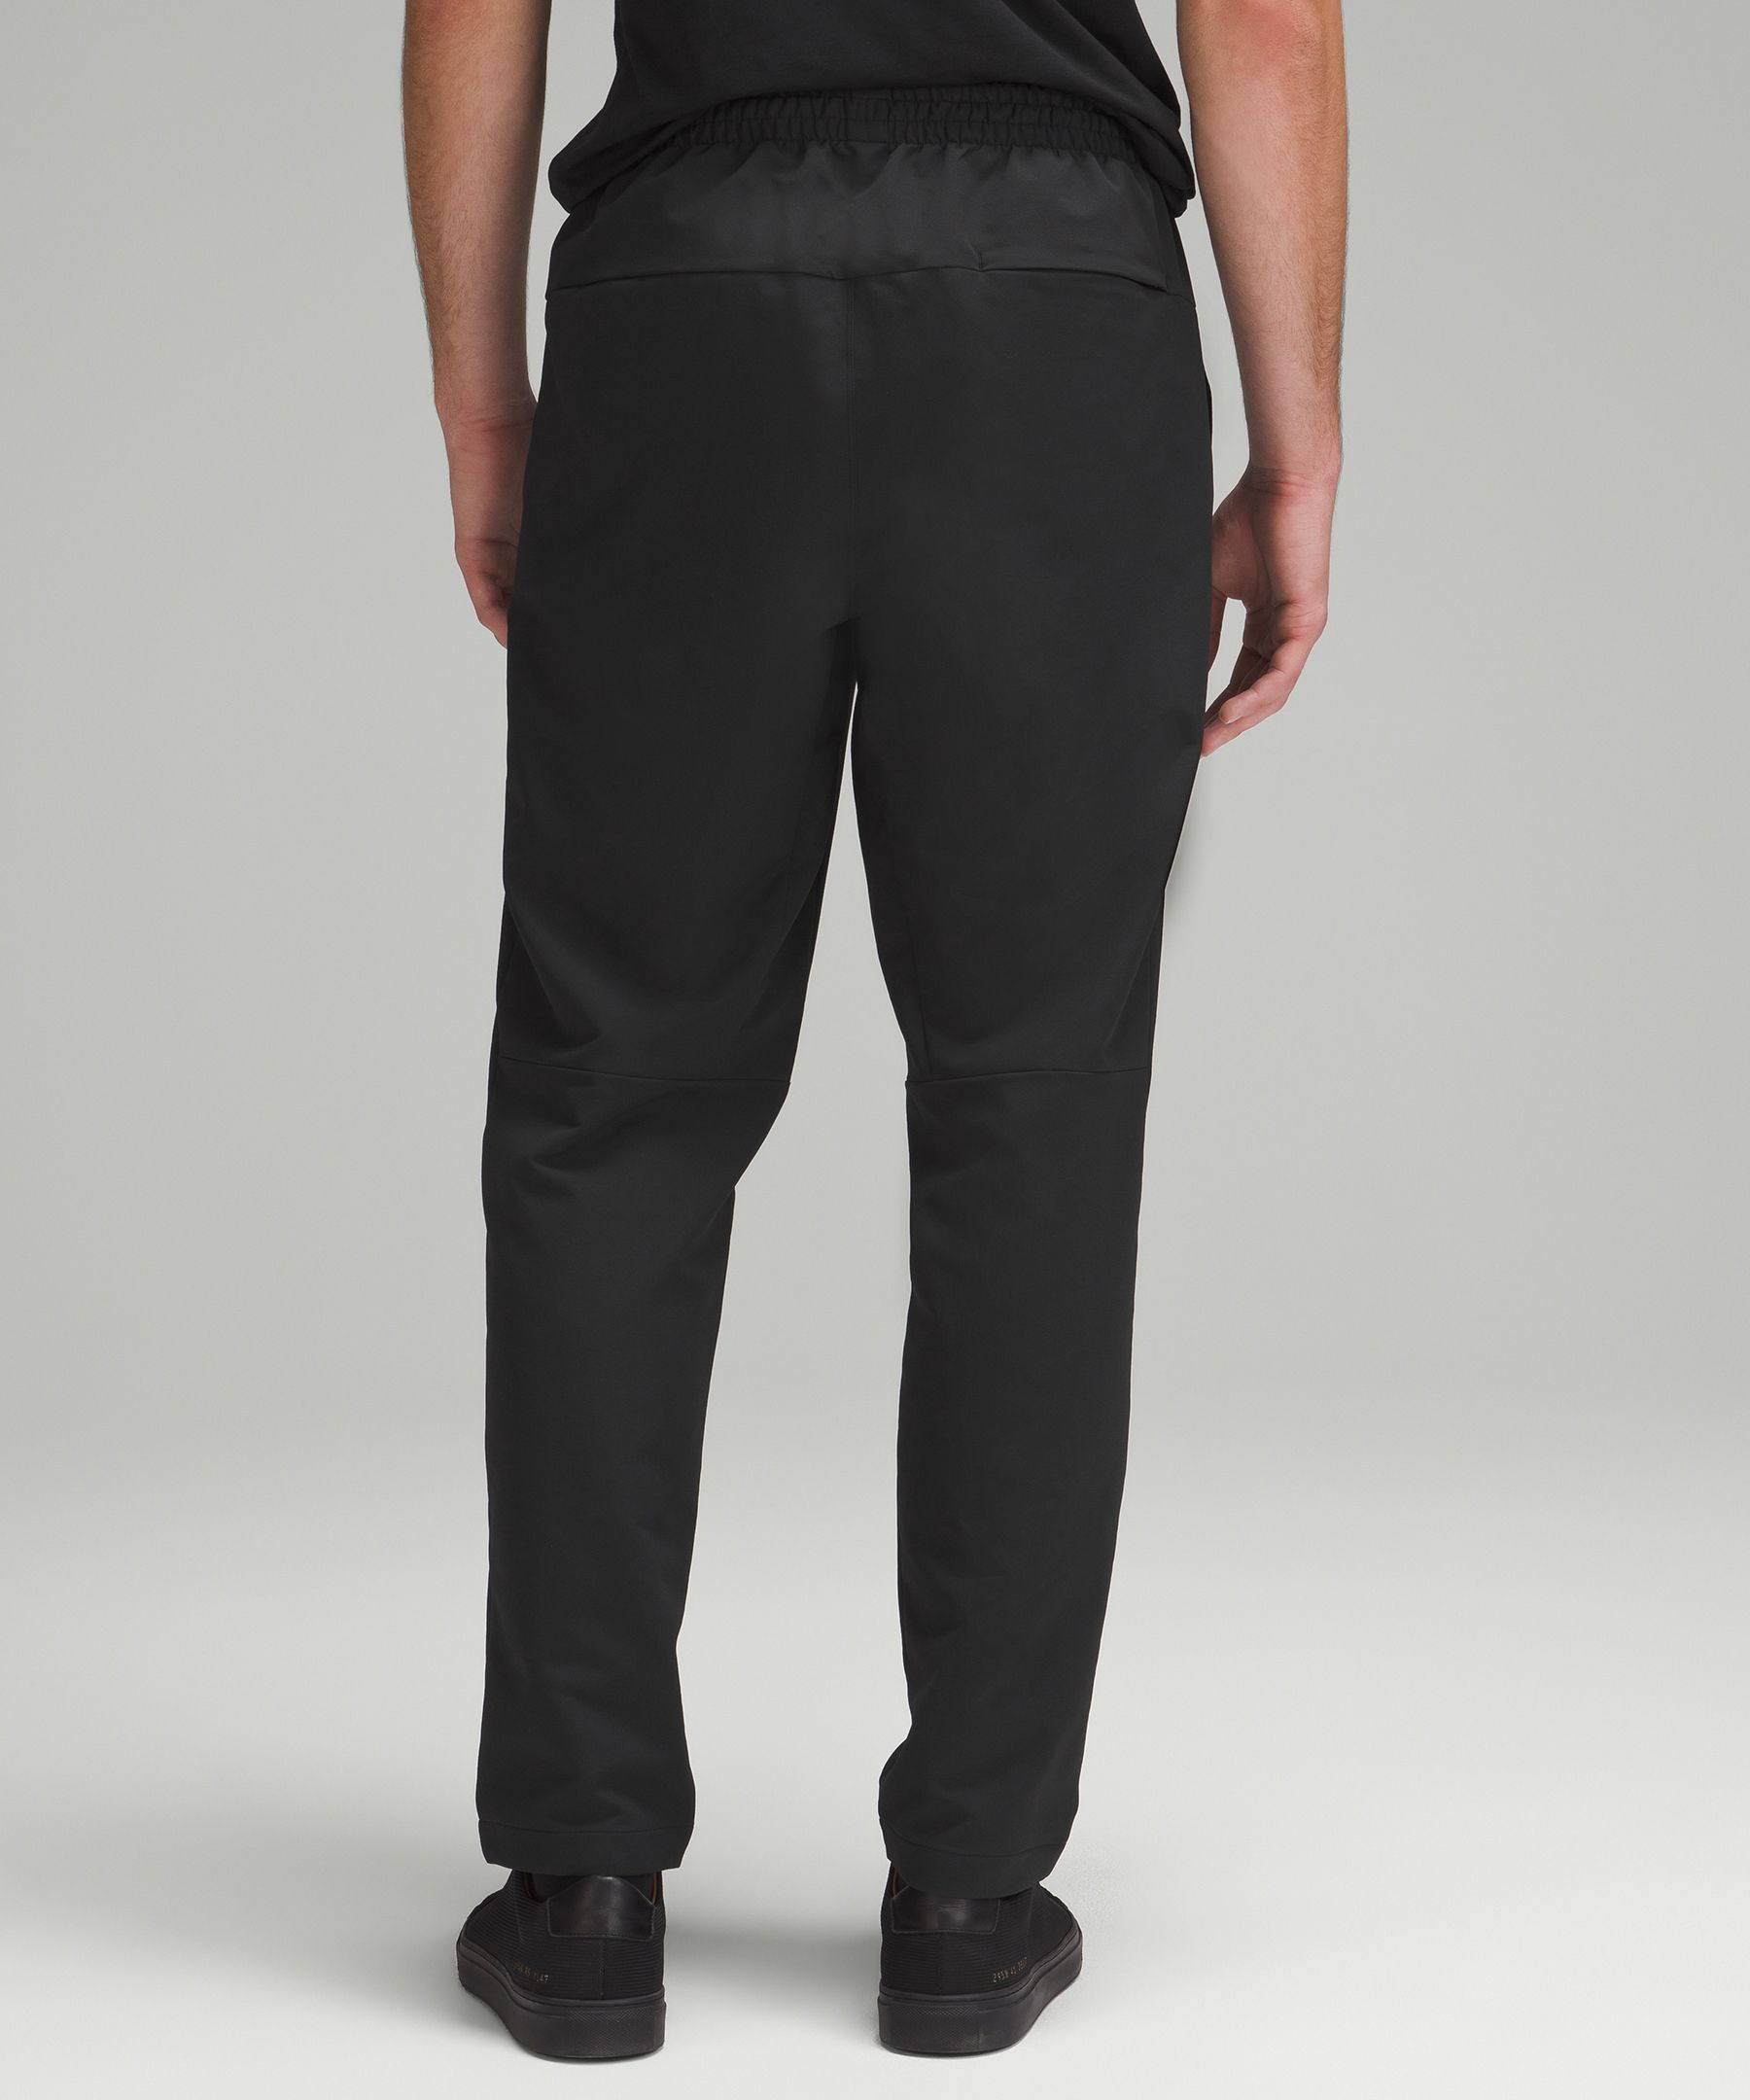 Lululemon Venture Pant Review Journal  International Society of Precision  Agriculture